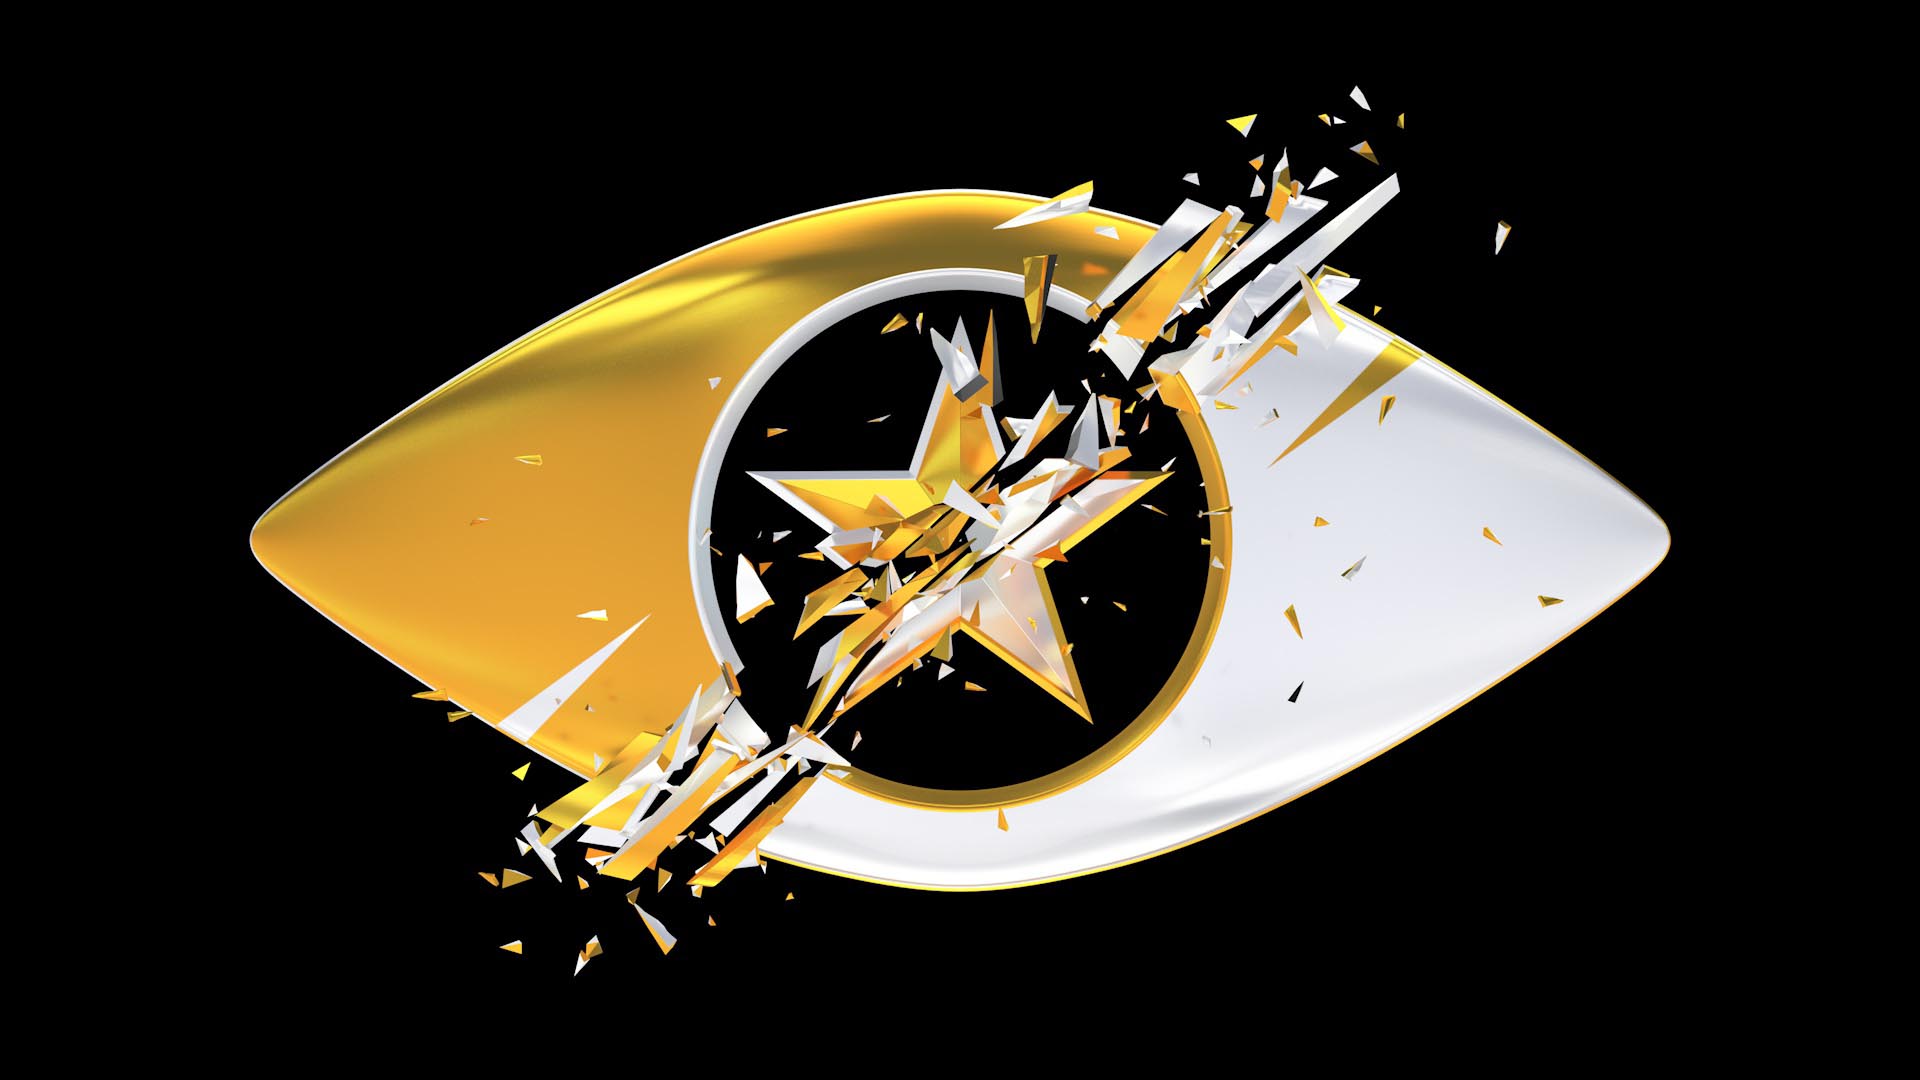 Day 39: C5 reveal updated golden Celebrity Big Brother Eye